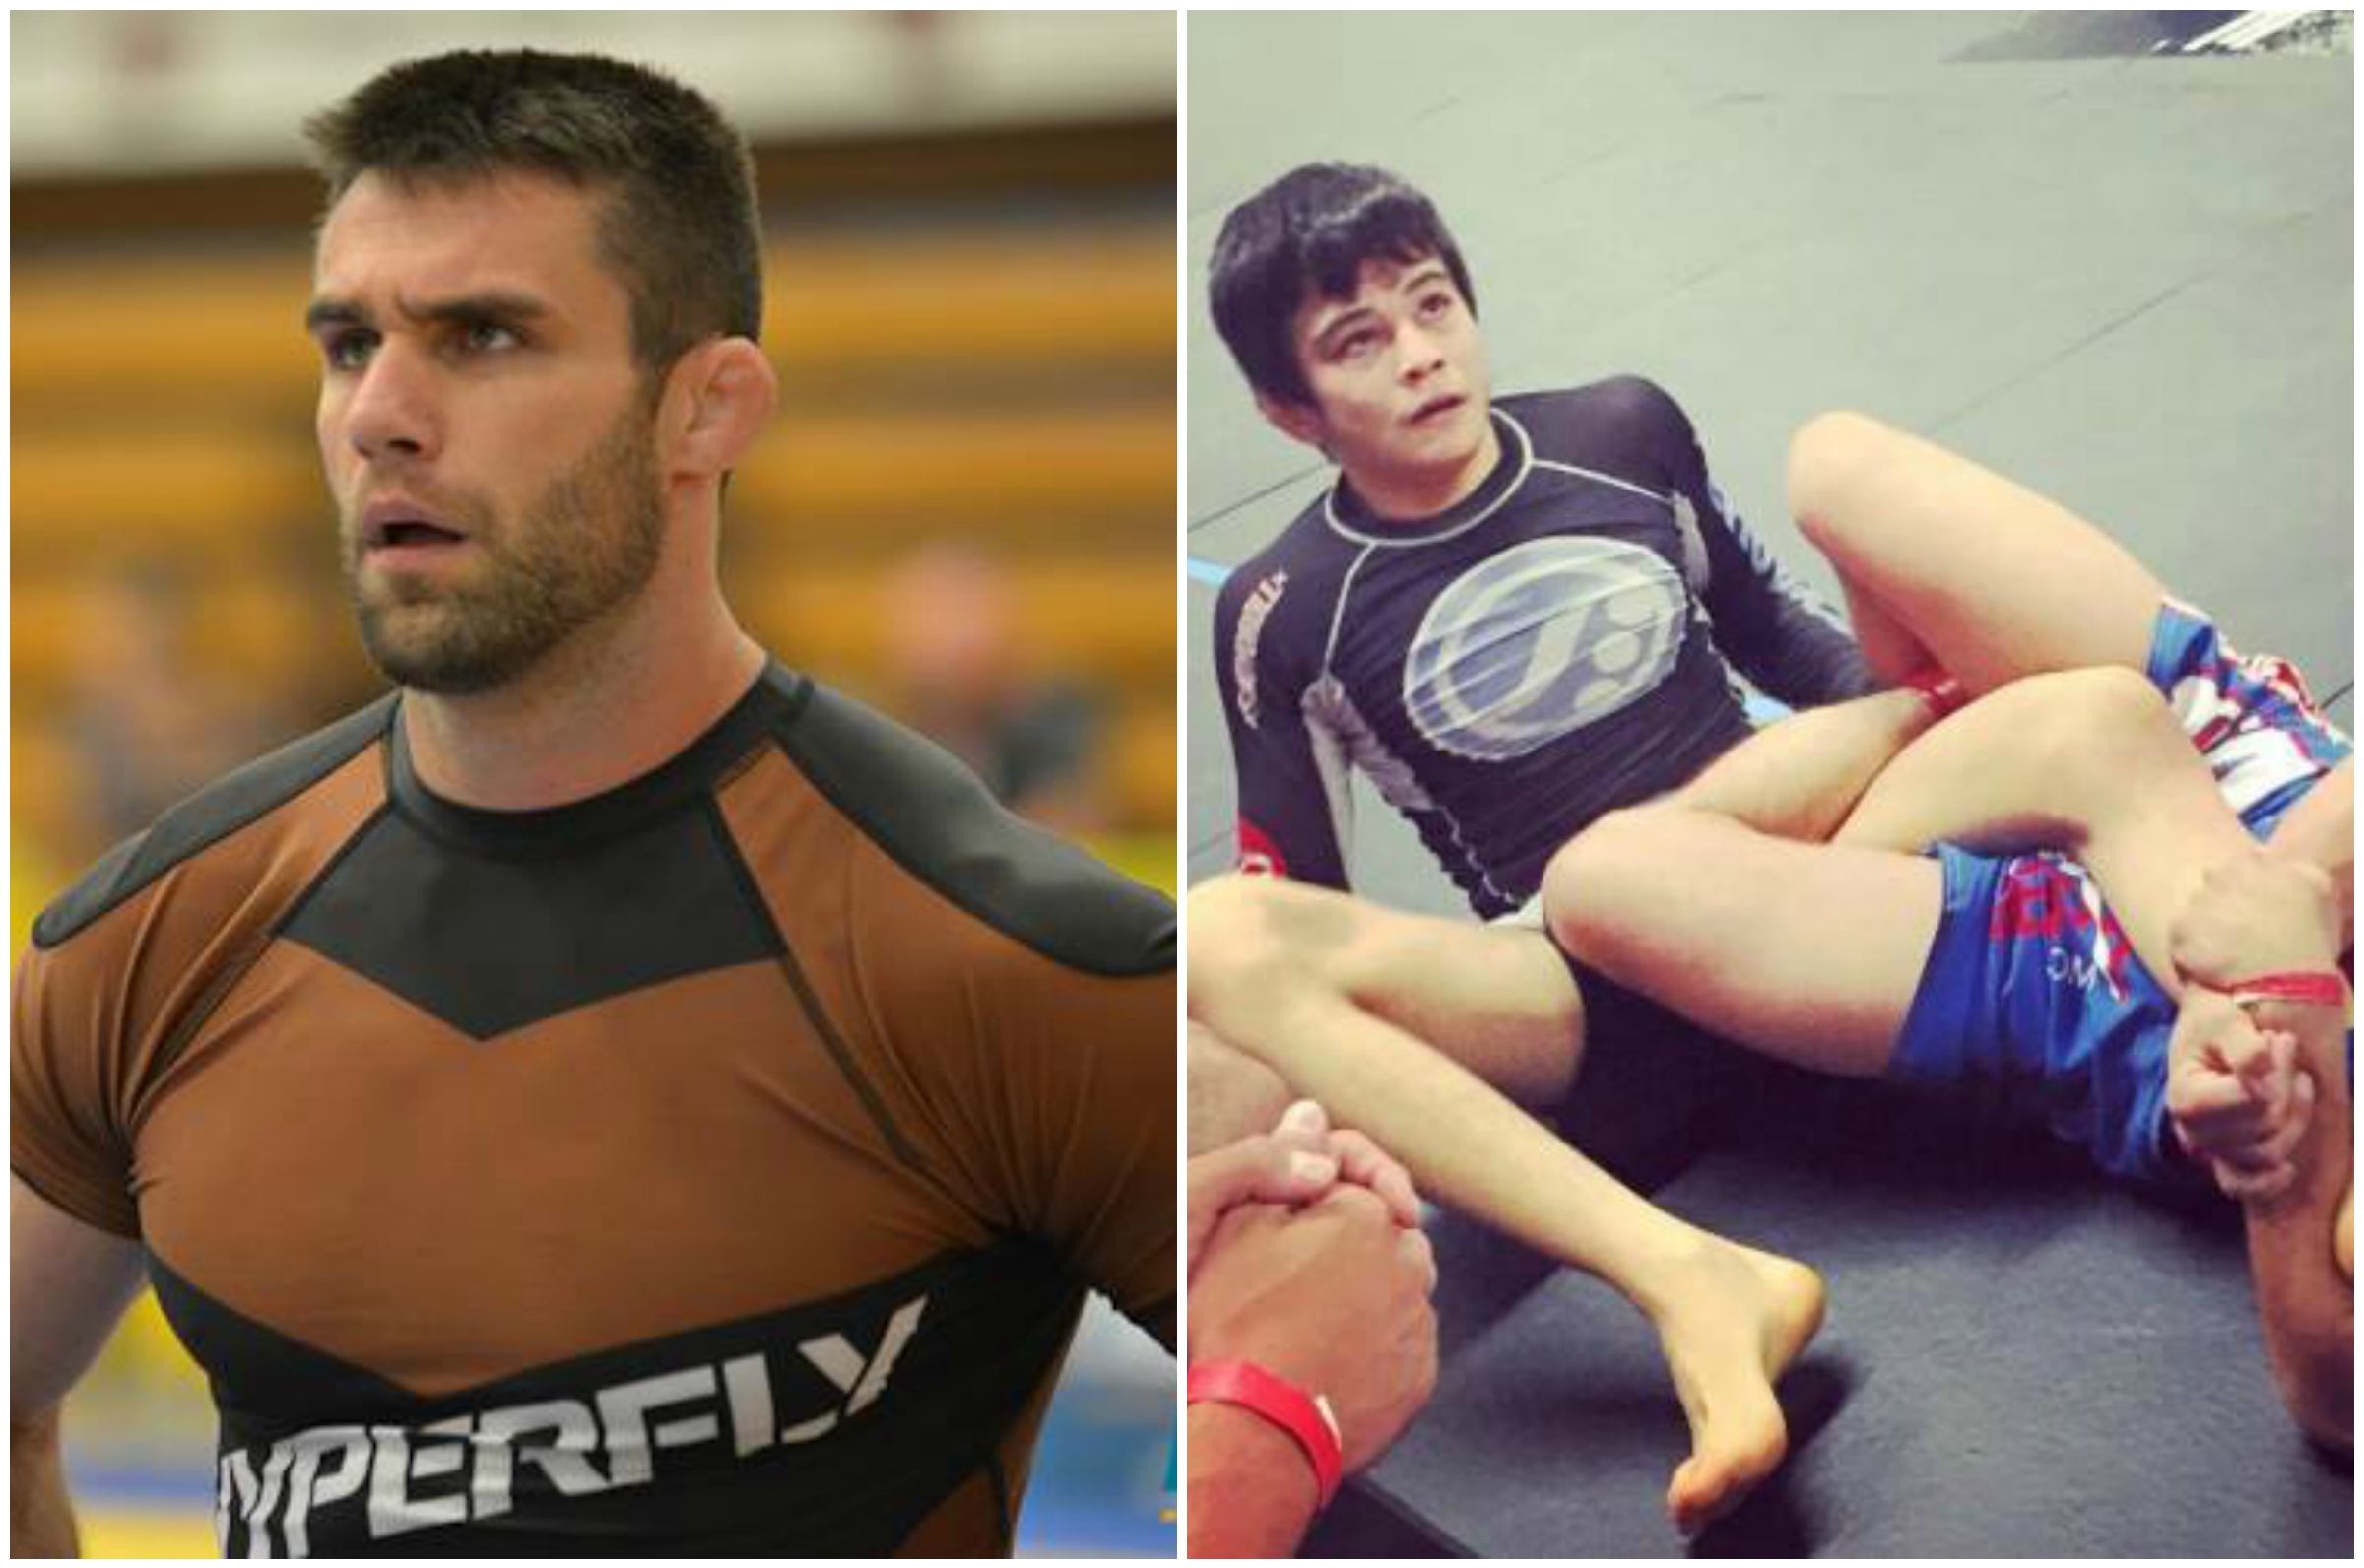 ADCC 2015 Competitors List Update: Jared Dopp In, Joao Miyao Out